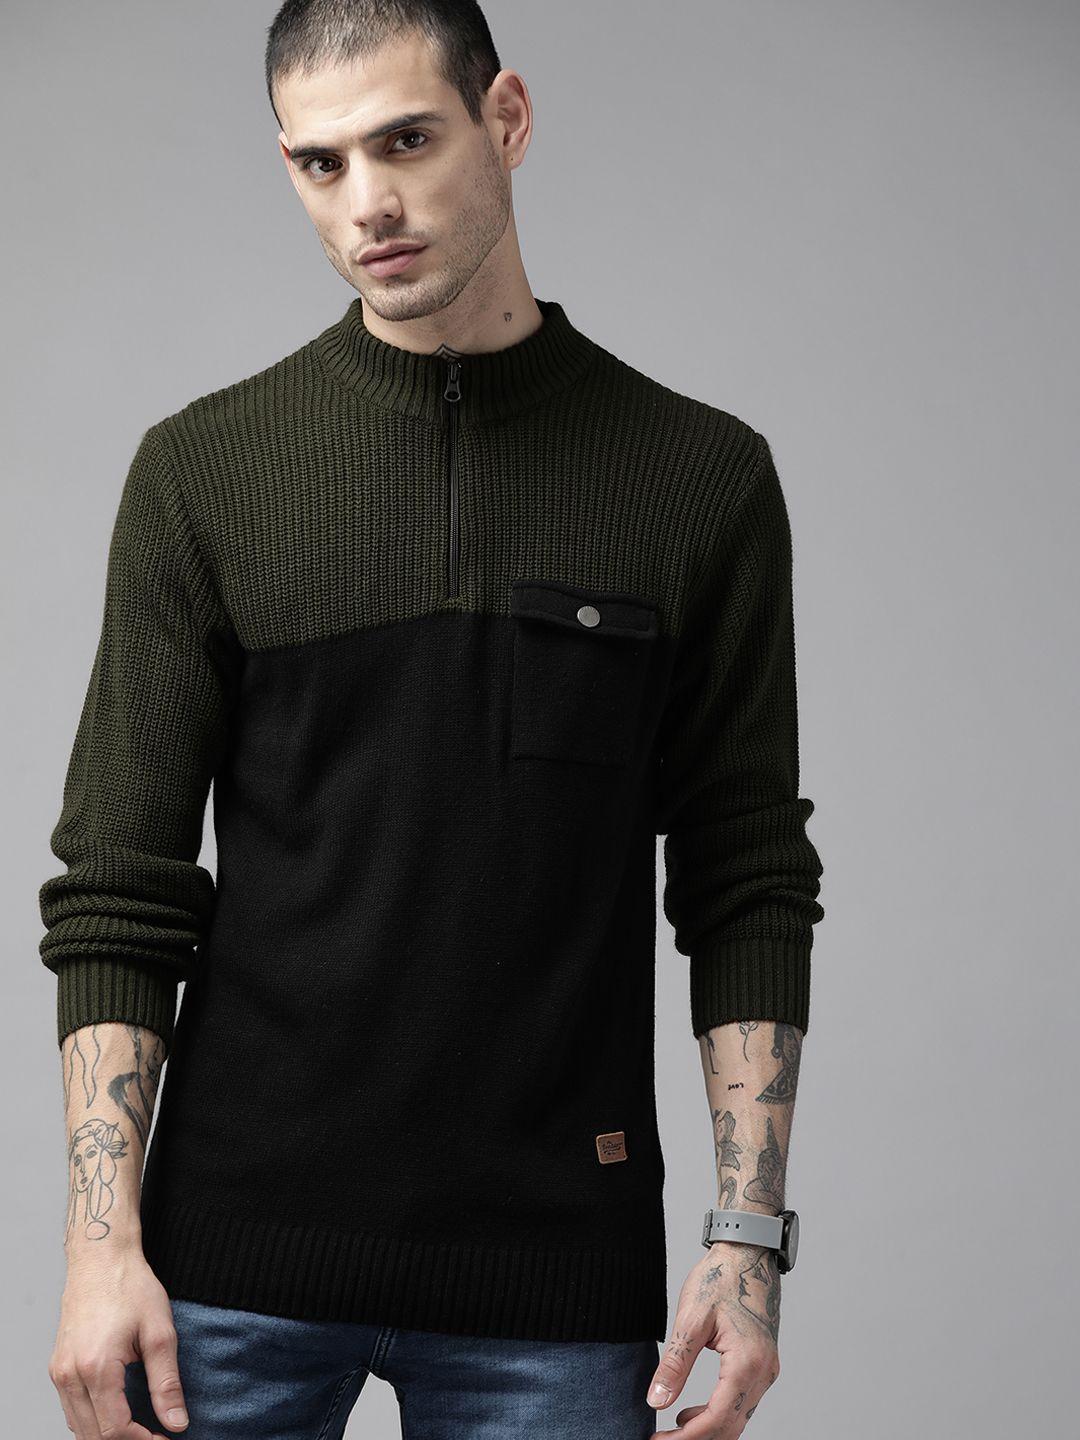 the roadster lifestyle co. men olive green & black colourblocked acrylic pullover